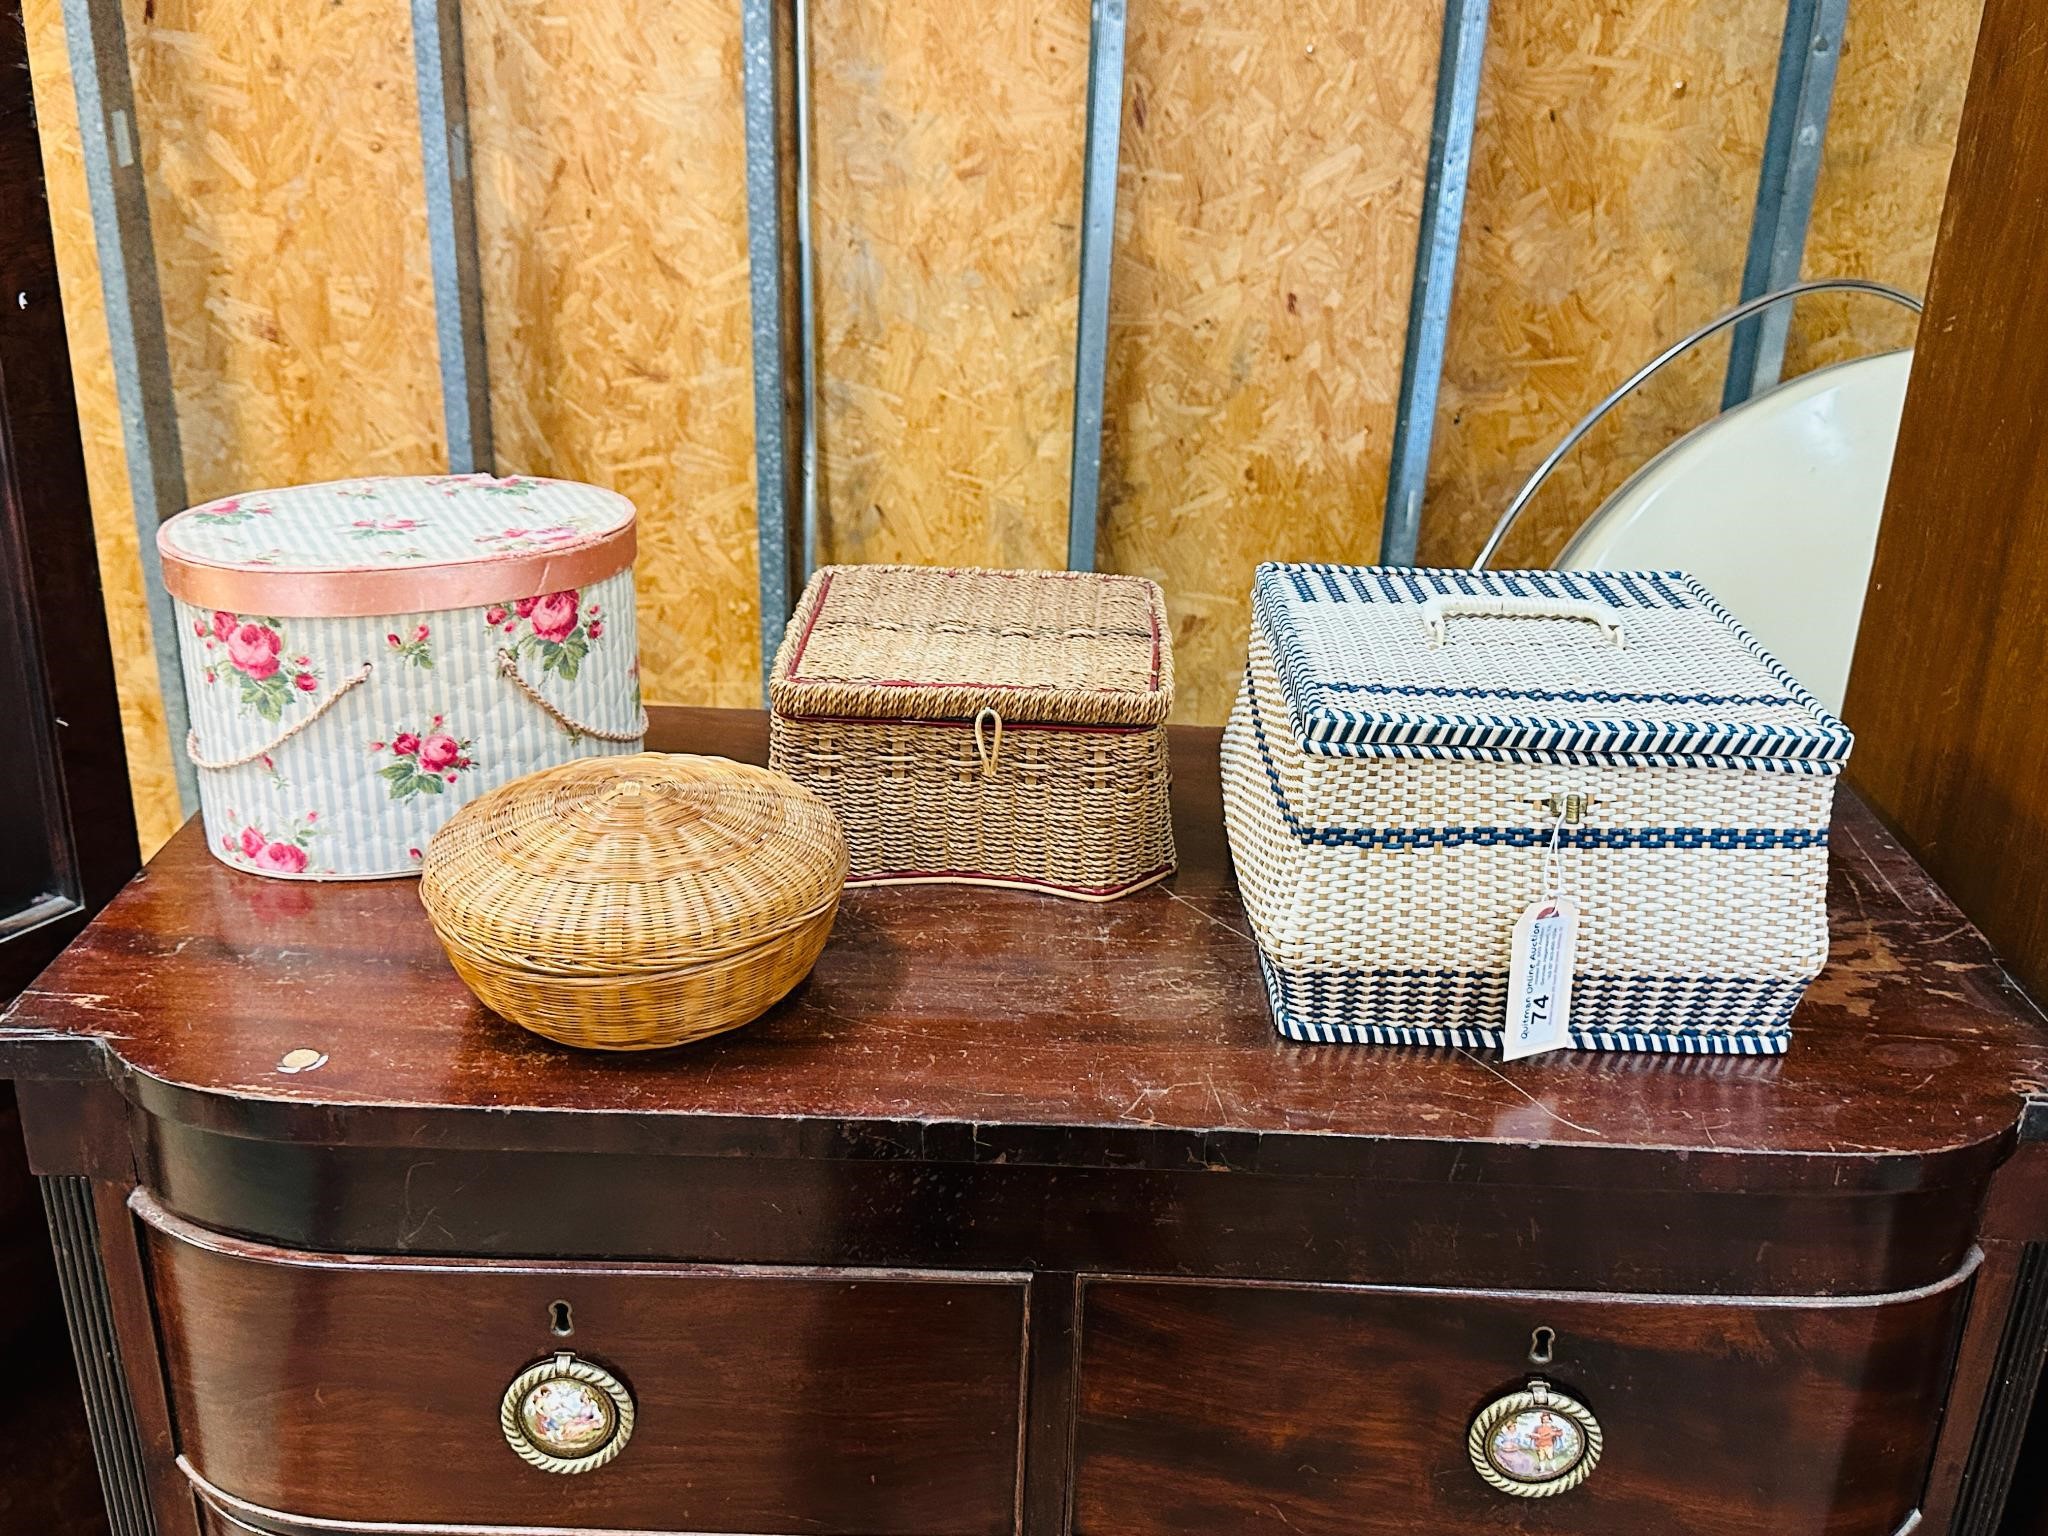 Group of Vintage Sewing Baskets & Related Items